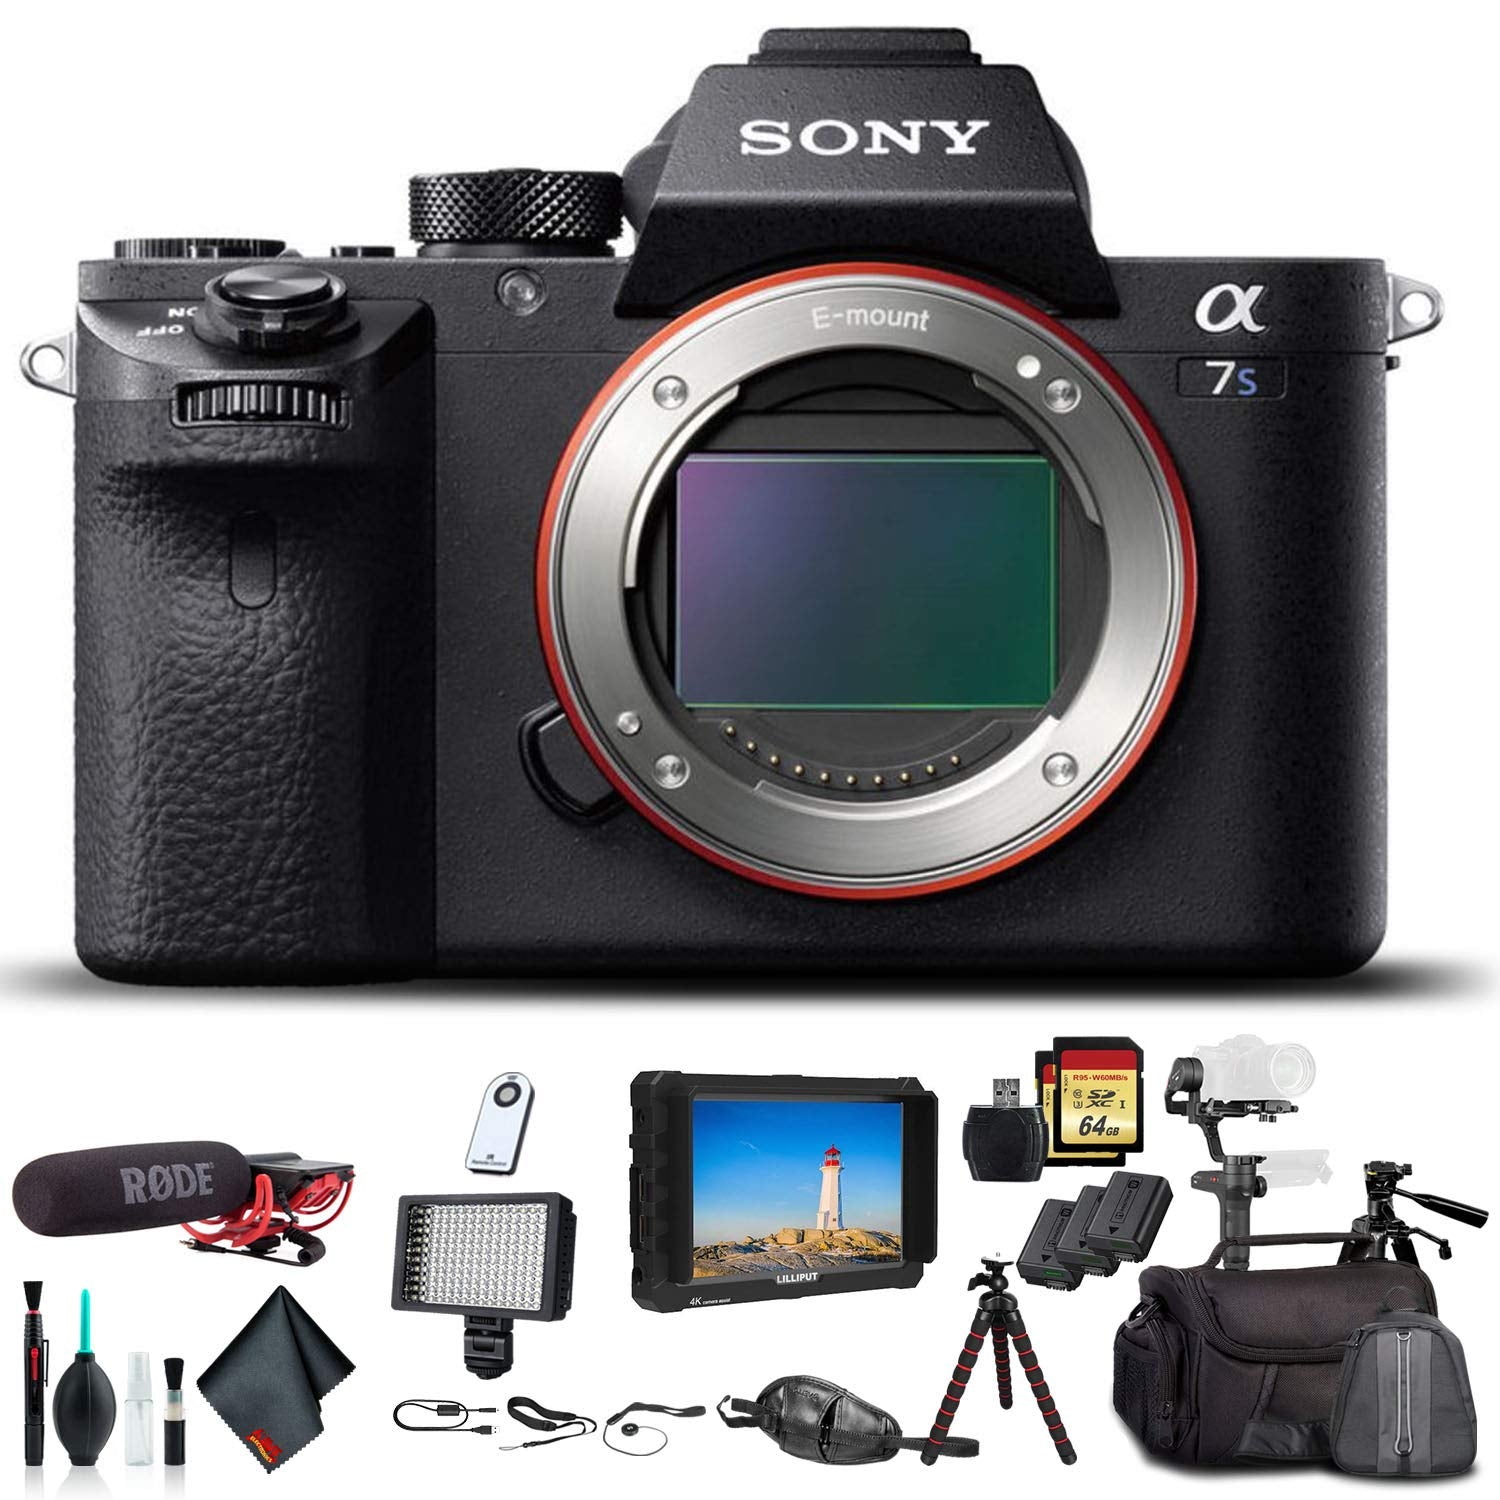 Sony Alpha a7S II Mirrorless Camera ILCE7SM2/B With Soft Bag, Zhiyun-Tech WEEBILL Stabilizer, 2x Extra Batteries, Rode Mic, Light, 2x 64GB Memory Cards, External Monitor , Plus Essential Accessories